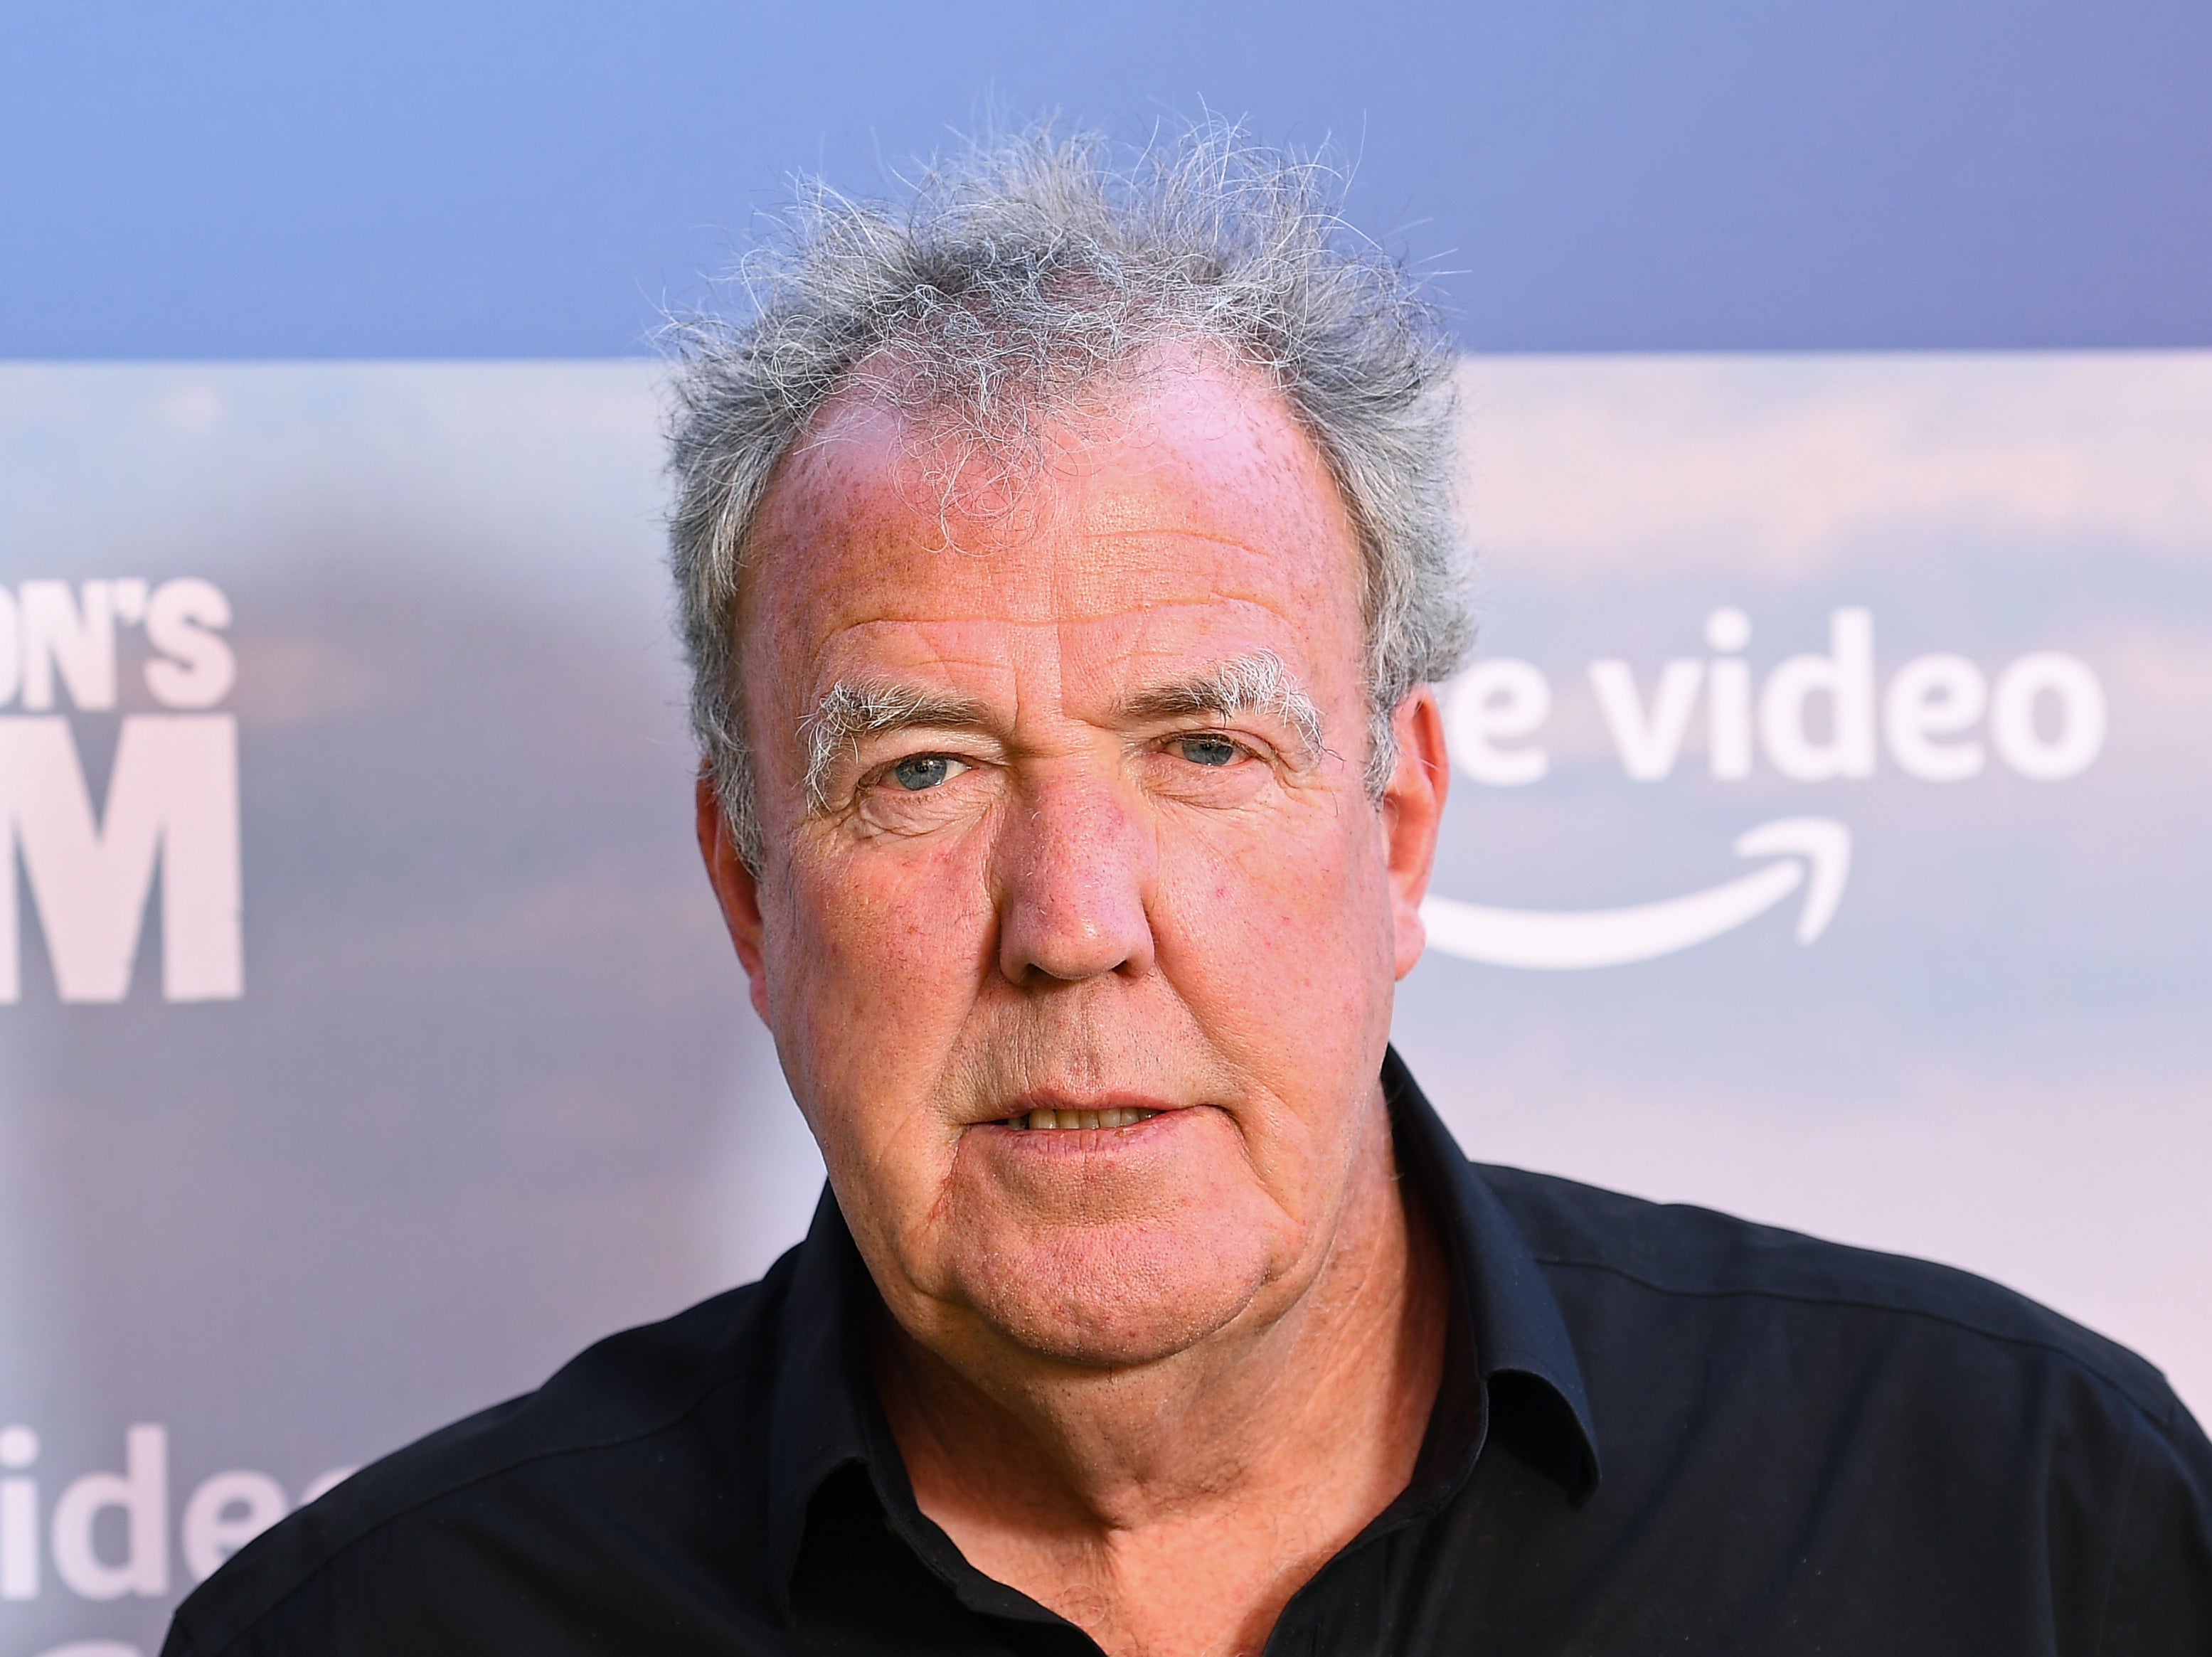 Disgraced: Jeremy Clarkson faced widespread condemnation for his December column about the duchess of Sussex